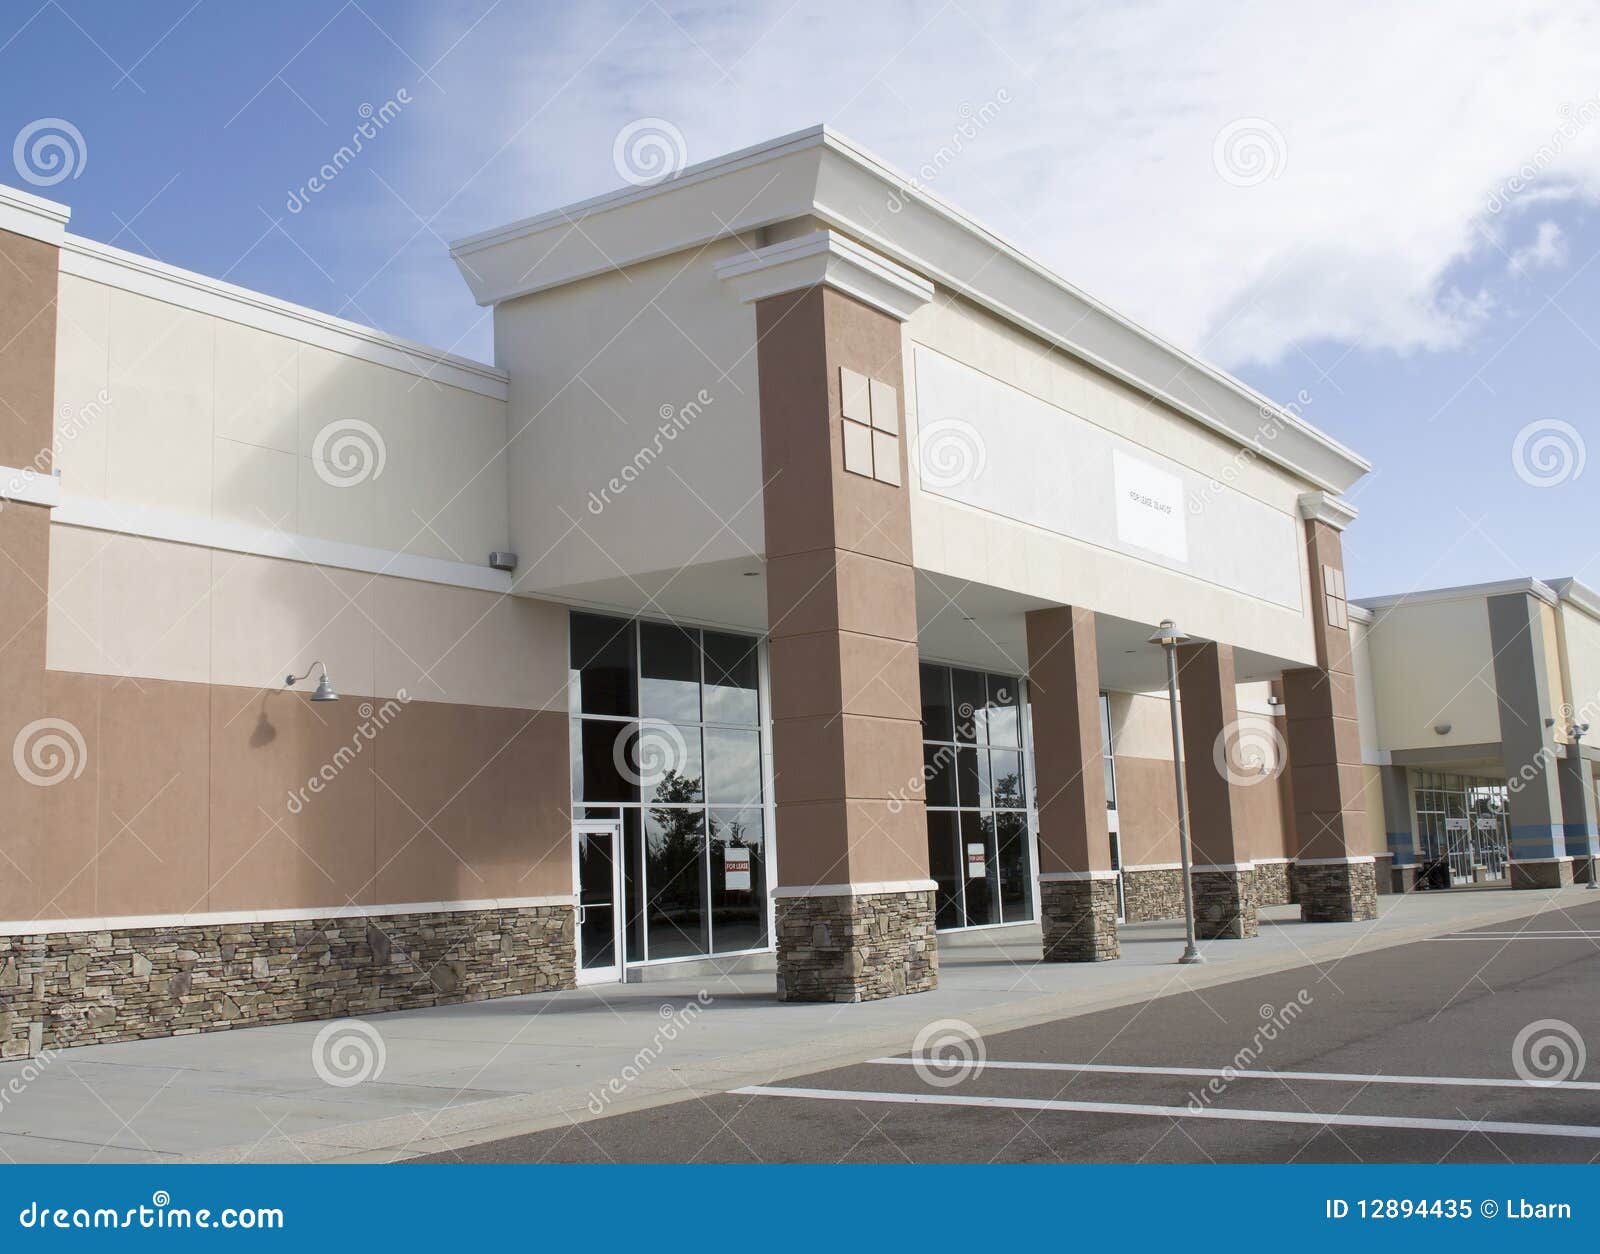 large empty retail store